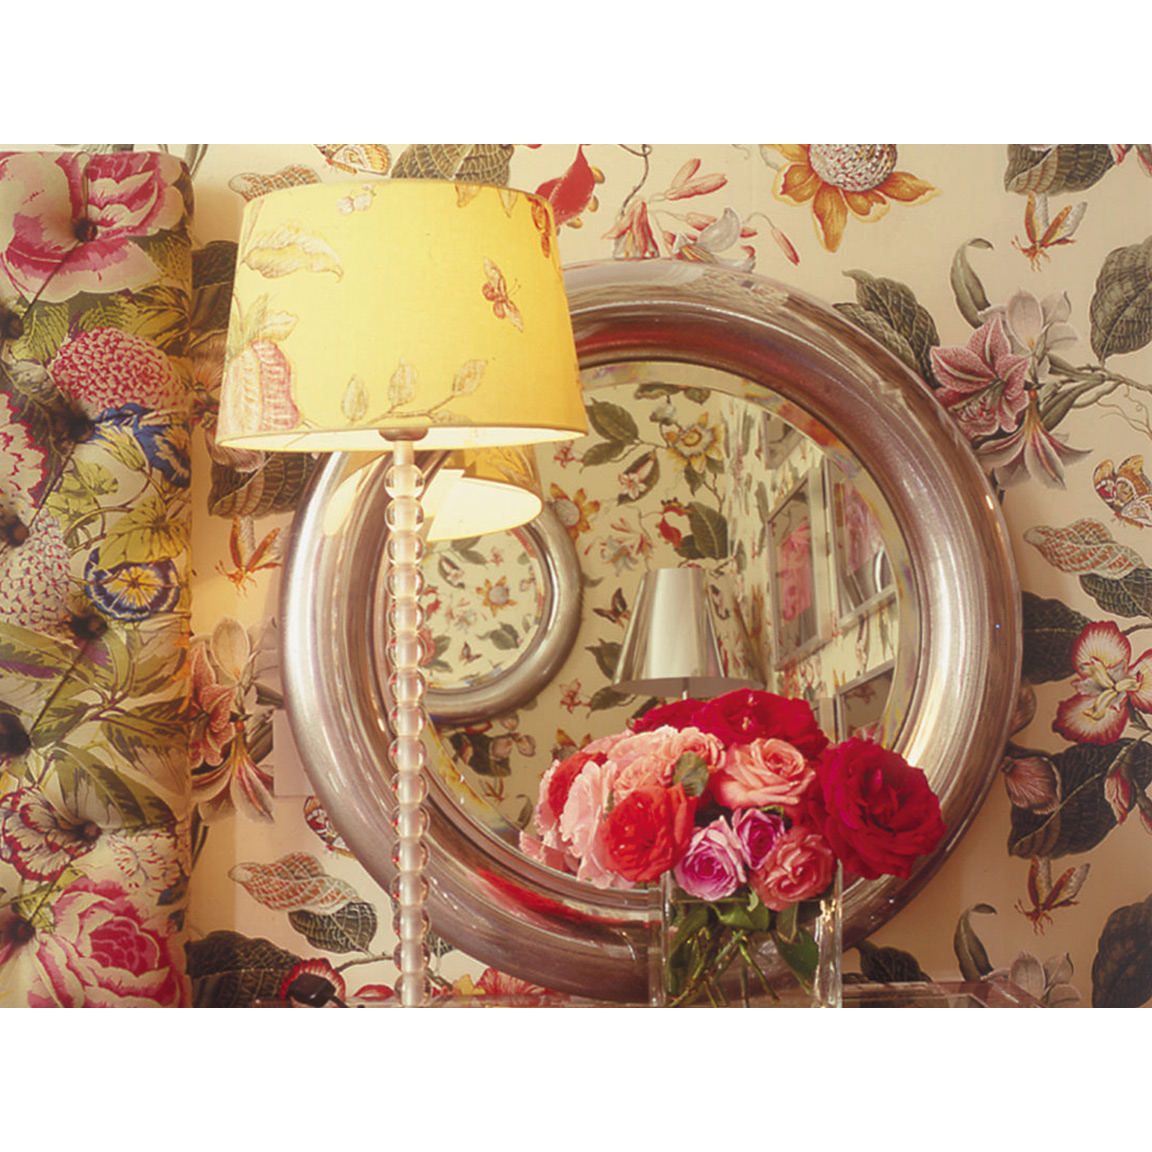 mirror on a floral wall with tablelamp